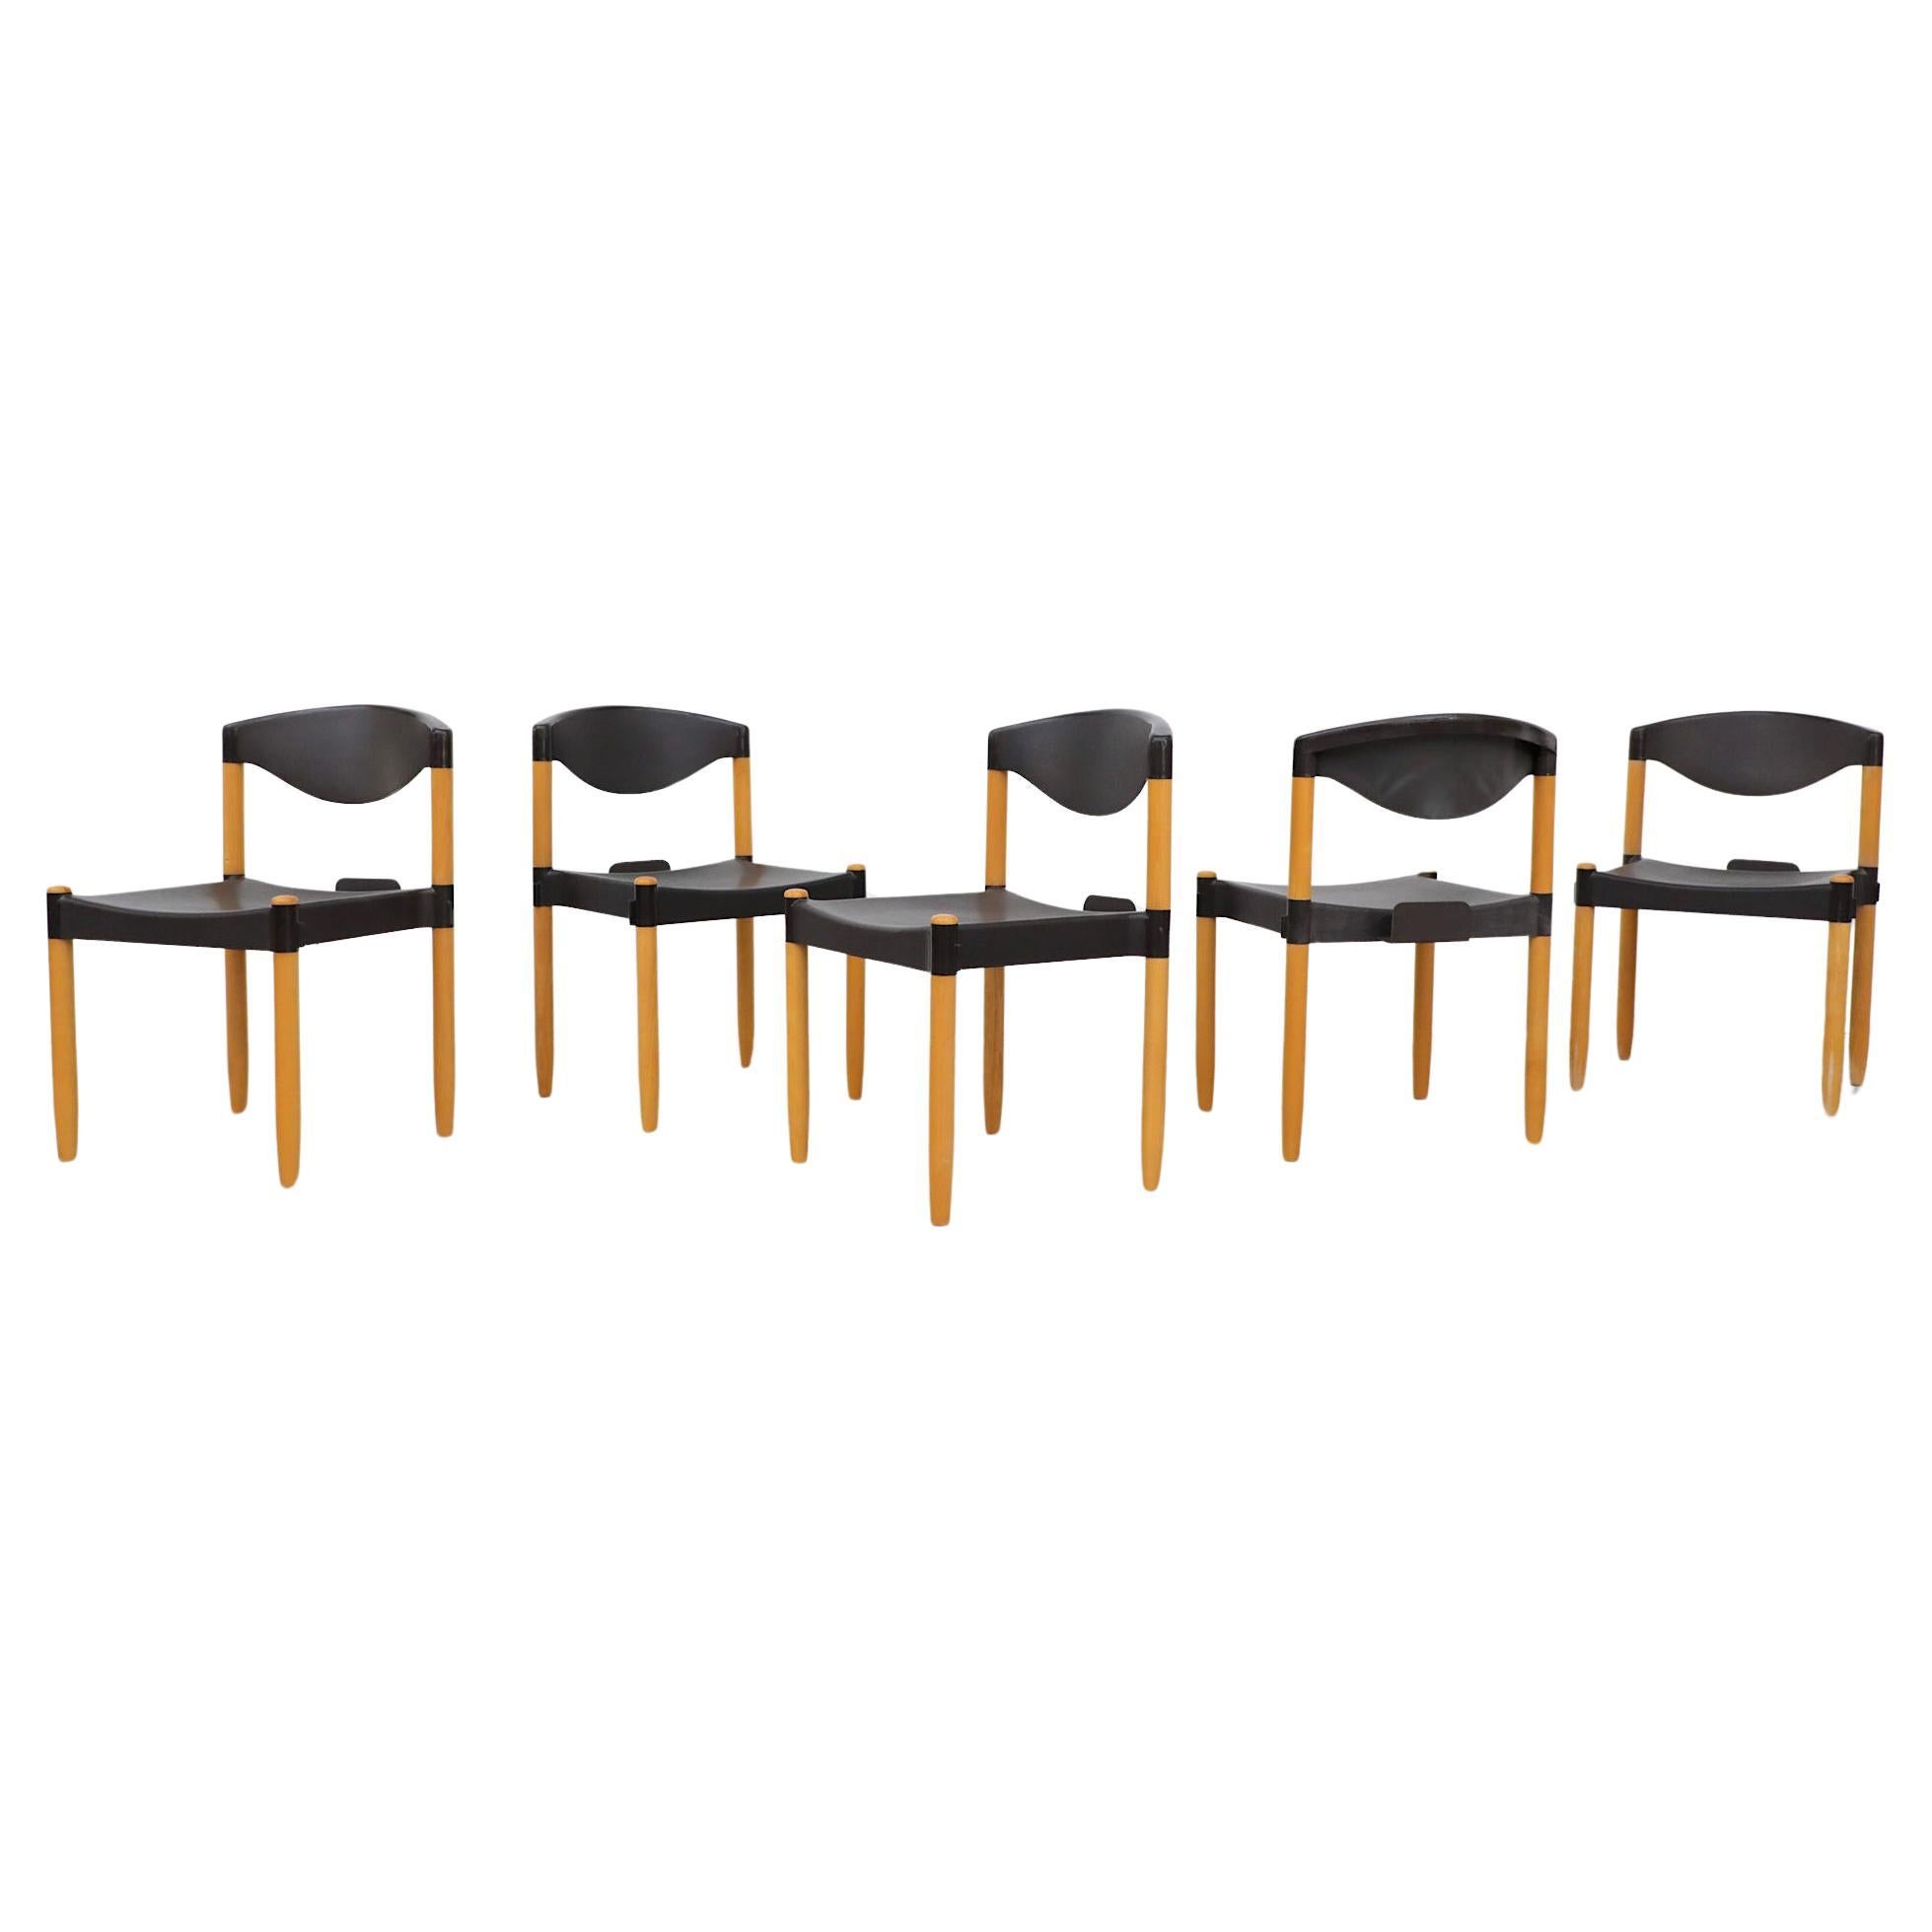 Casala 'Strax' Stacking Chairs BY Hartmut Lohmeyer